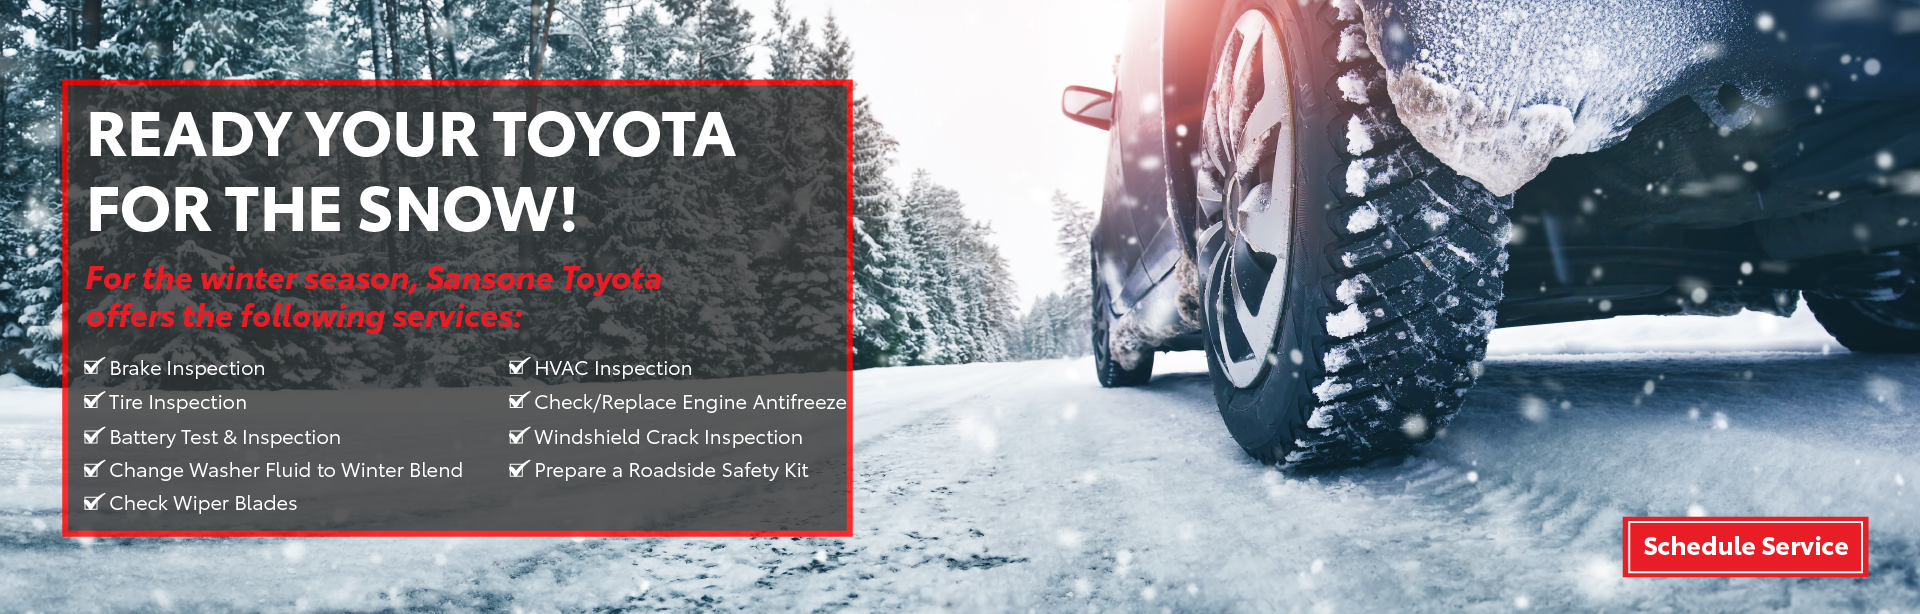 Ready your toyota for the snow!